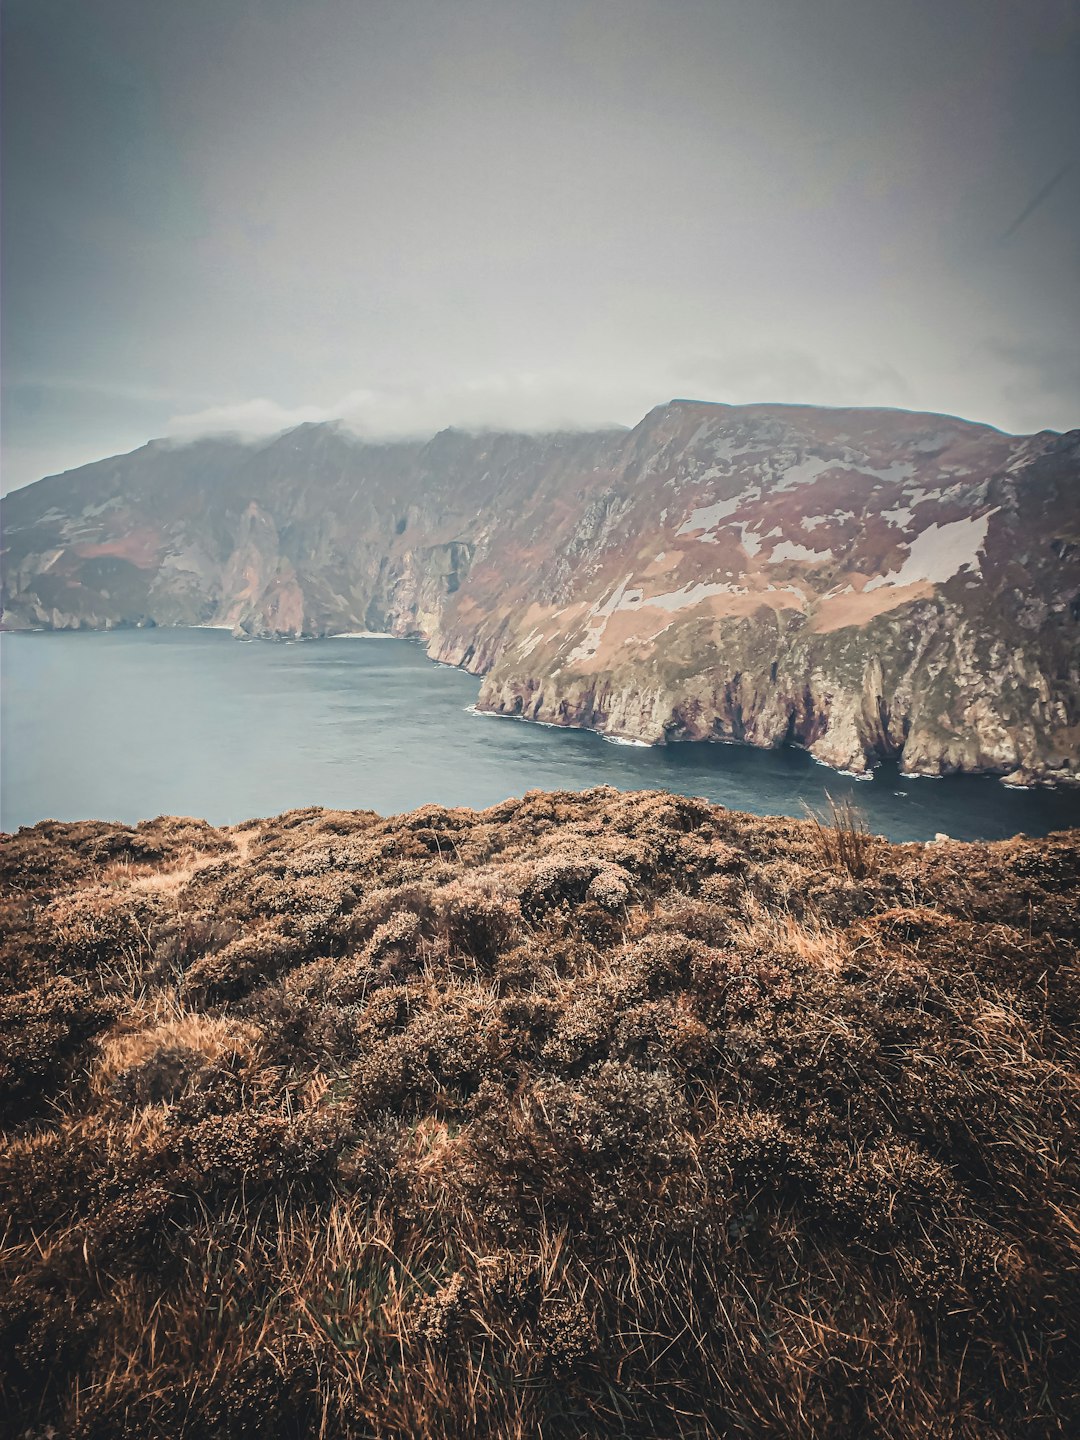 Cliff photo spot Sliabh Liag County Donegal